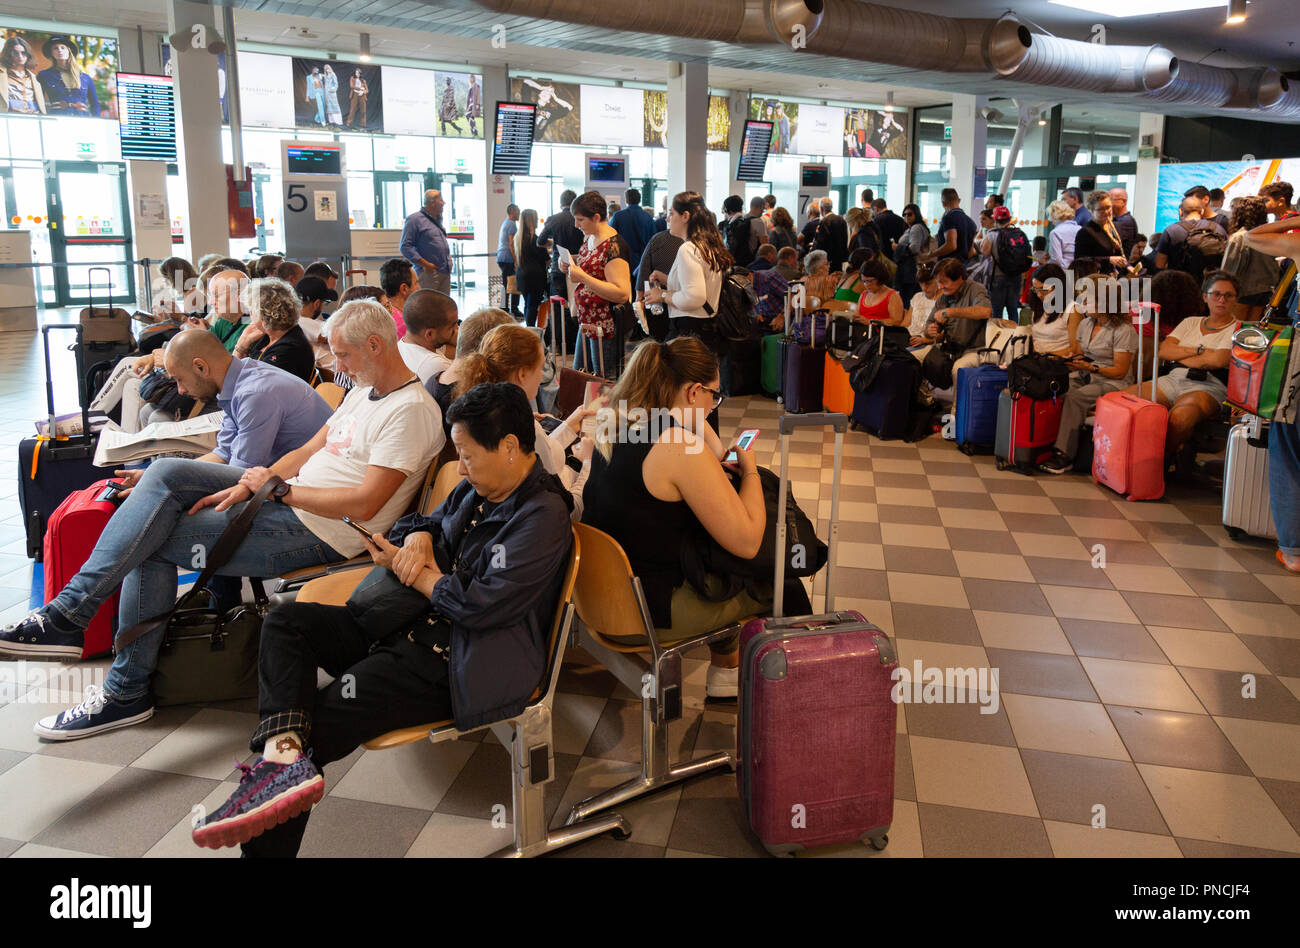 People at the departure gates in the departure lounge, the terminal interior, Pisa International Airport, Pisa, Tuscany, Italy Europe Stock Photo